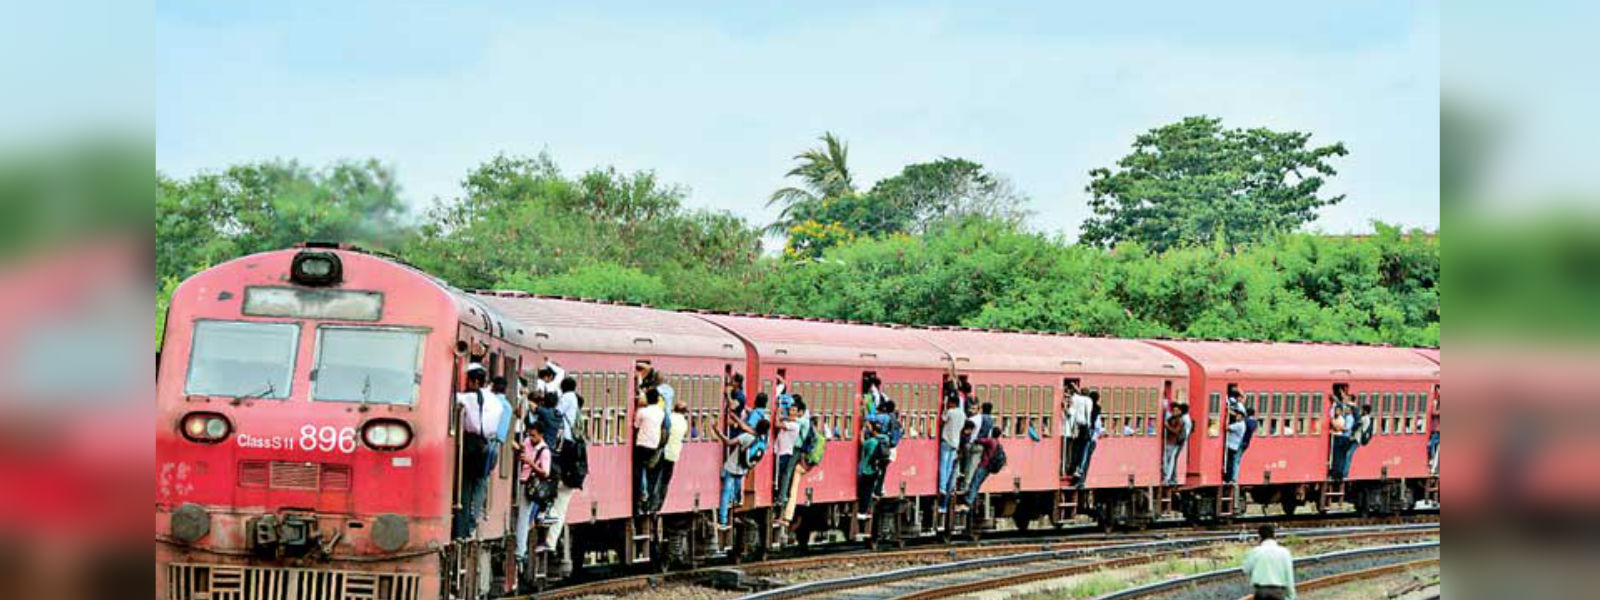 Trains on the main railway line delayed